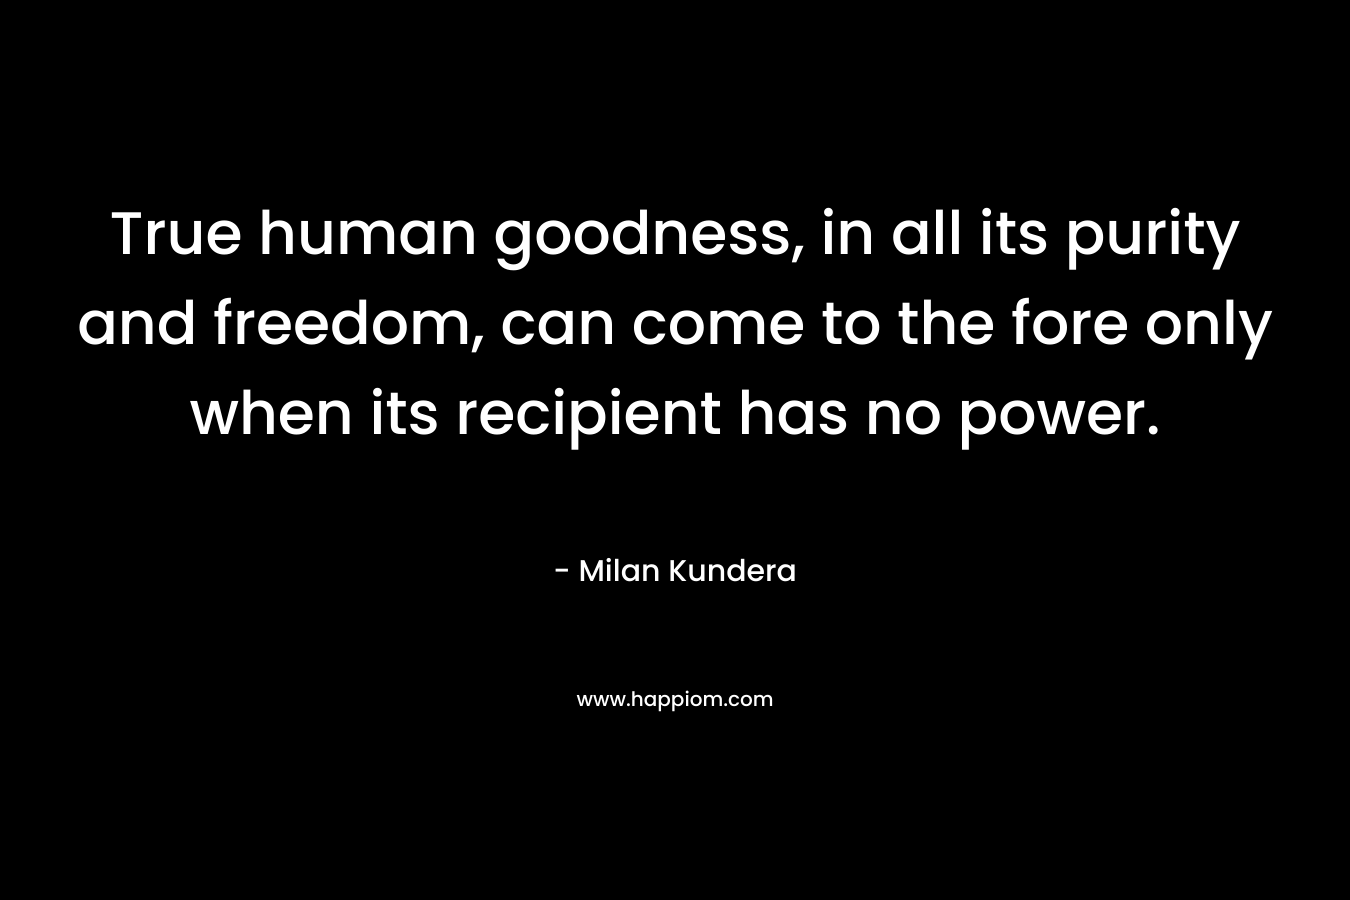 True human goodness, in all its purity and freedom, can come to the fore only when its recipient has no power. – Milan Kundera